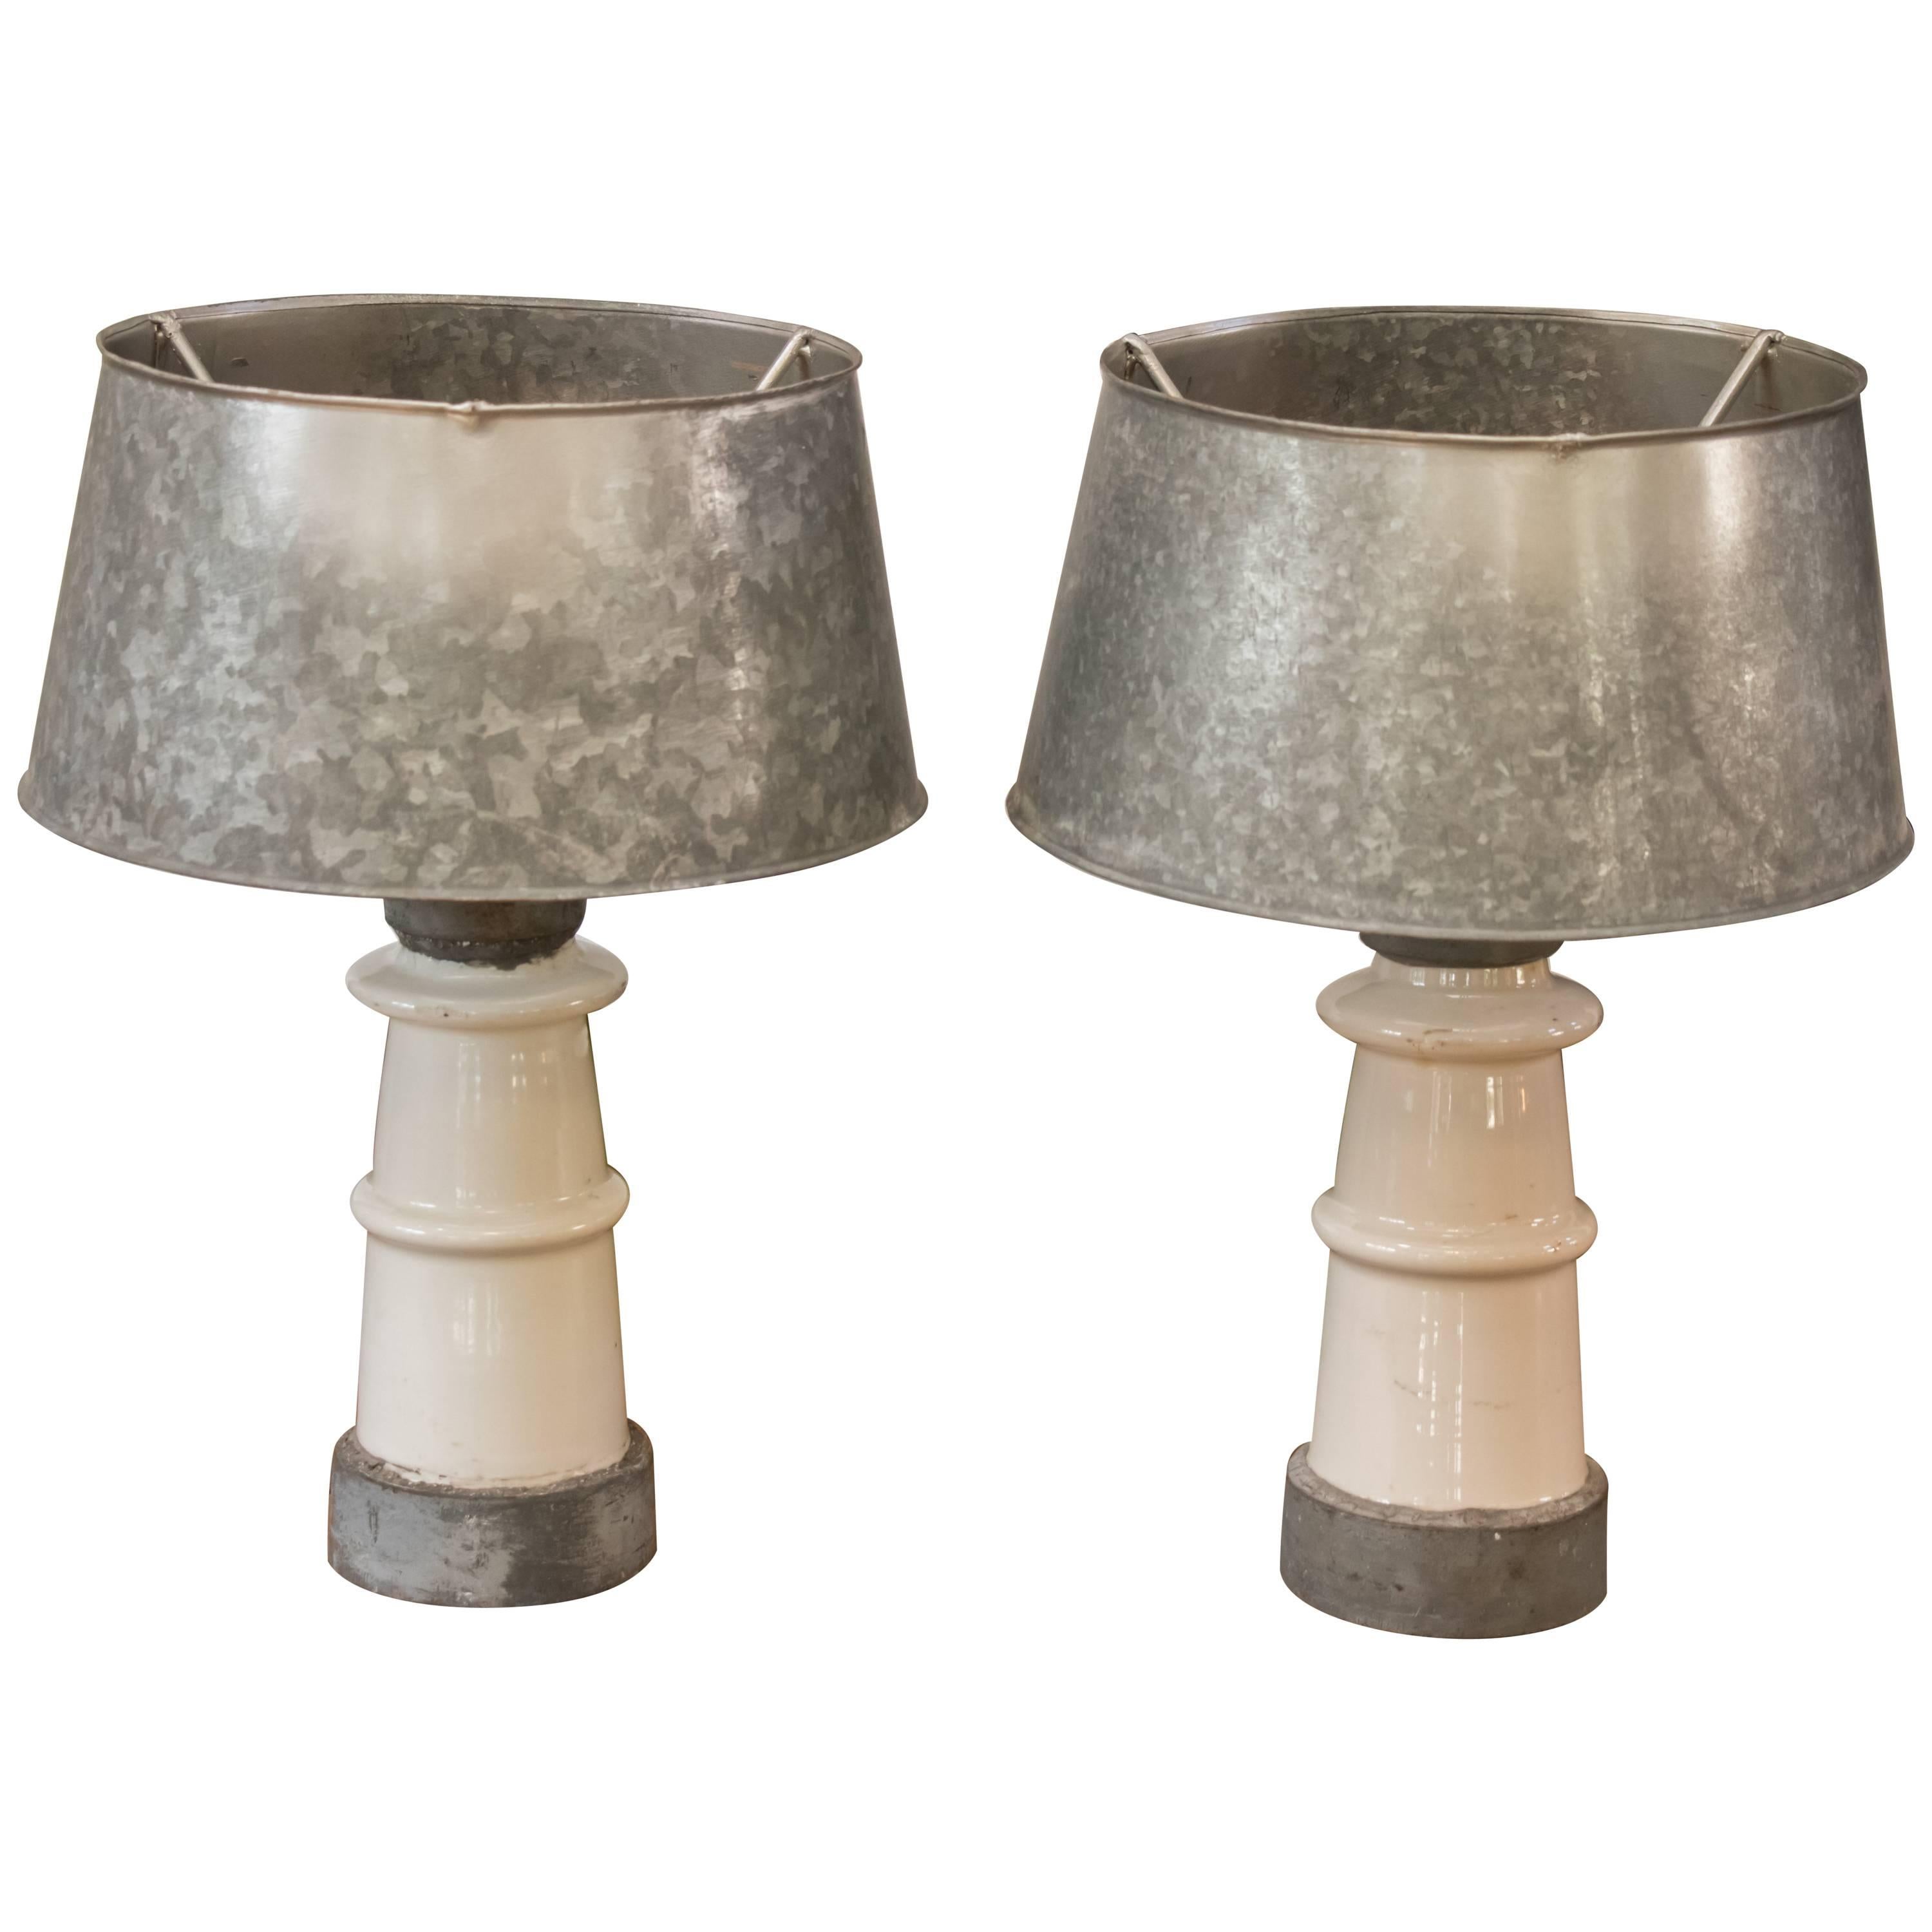 Pair of White Belgian Ceramic Table Lamps with Galvanized Shades, circa 1940s